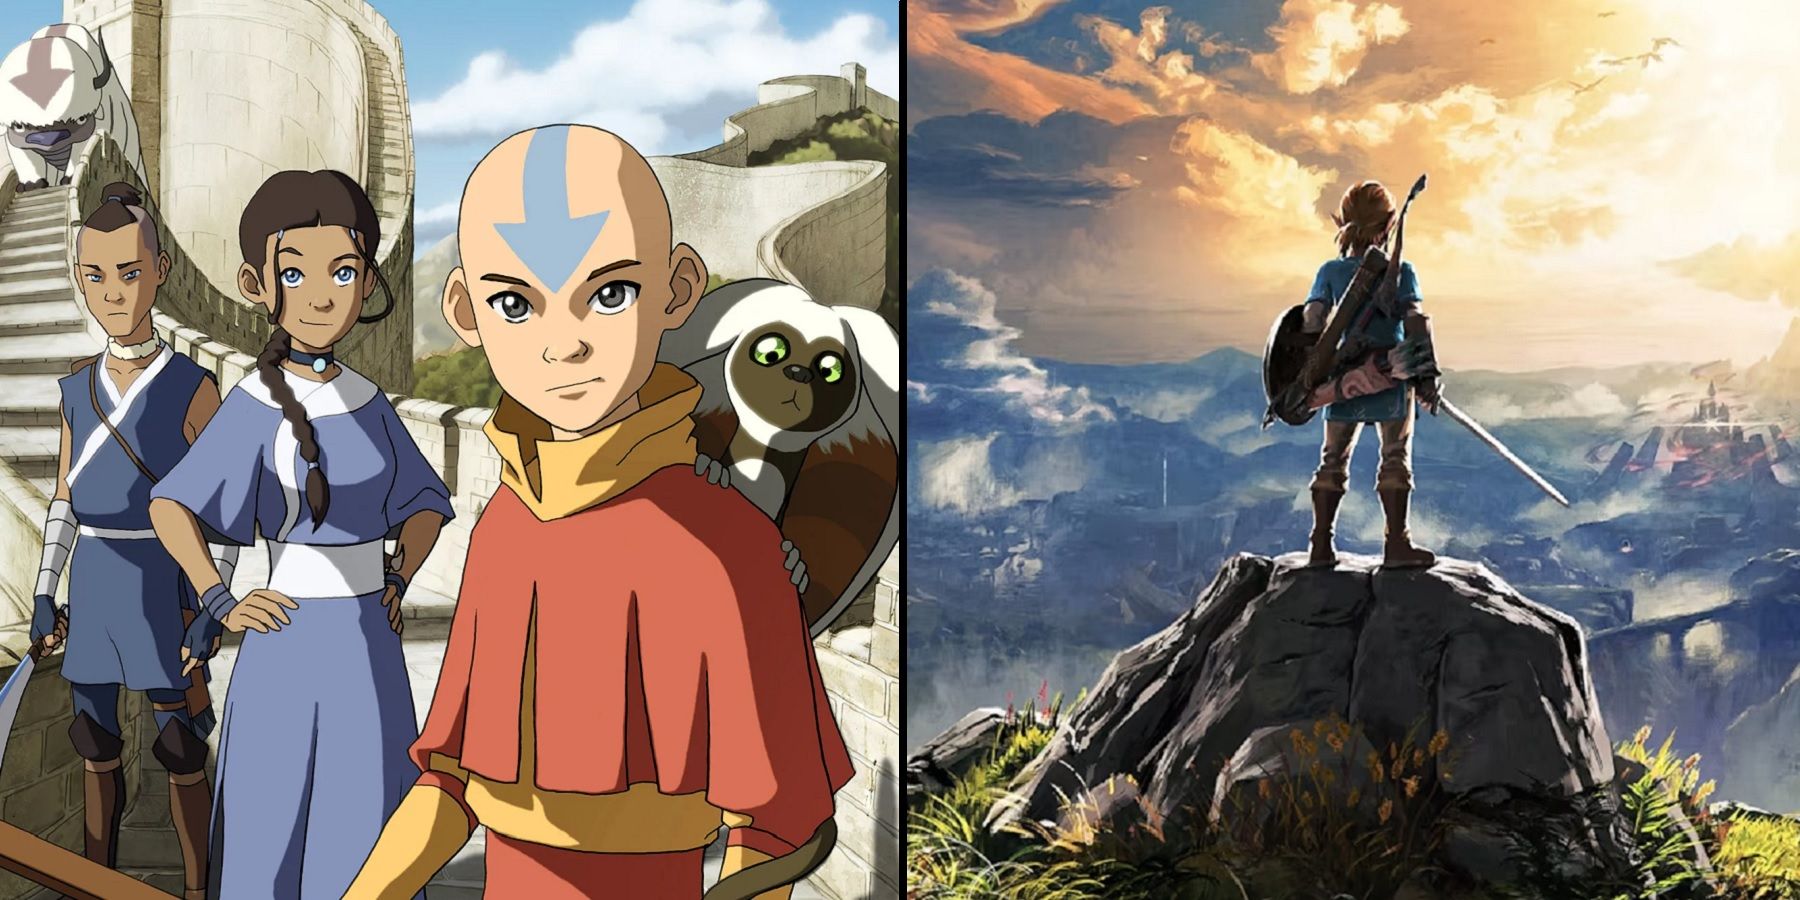 Avatar The Last Airbender  Games Videos  Clips